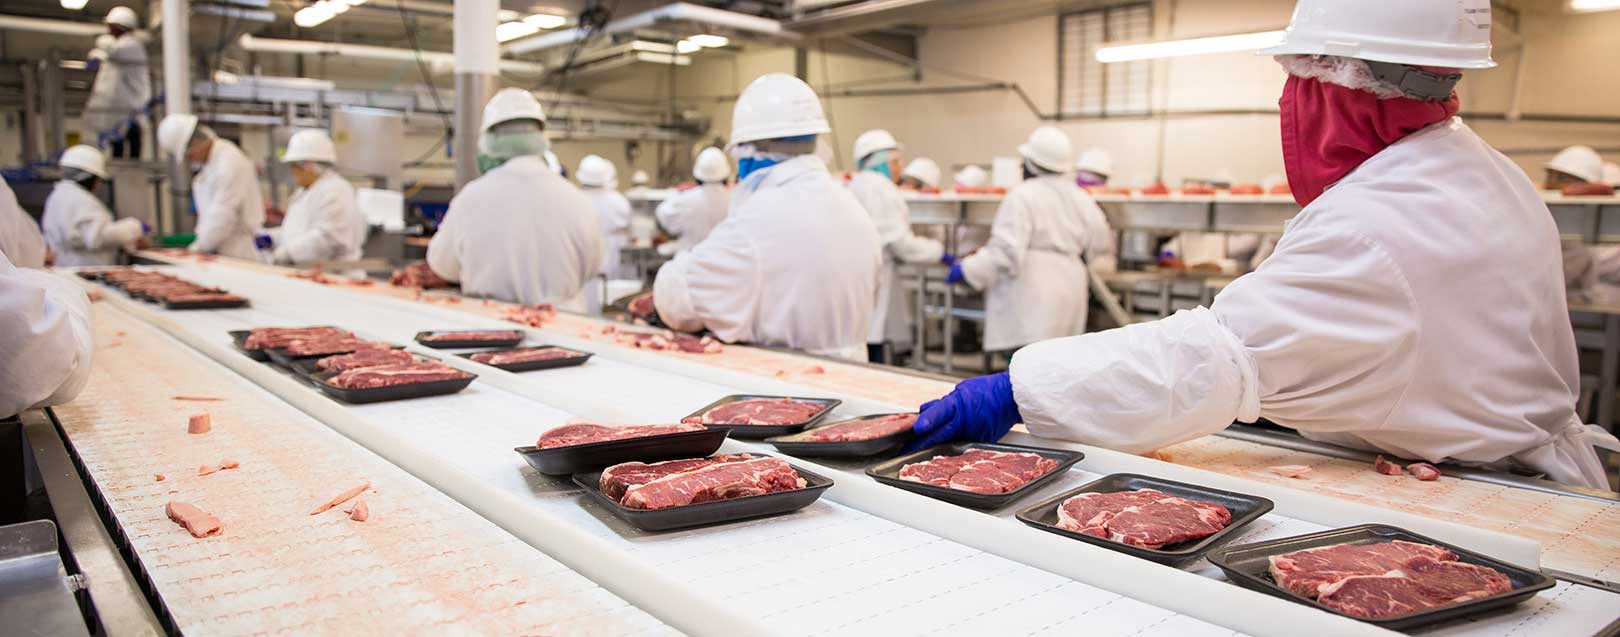 US announces immediate suspension of beef imports from Brazil